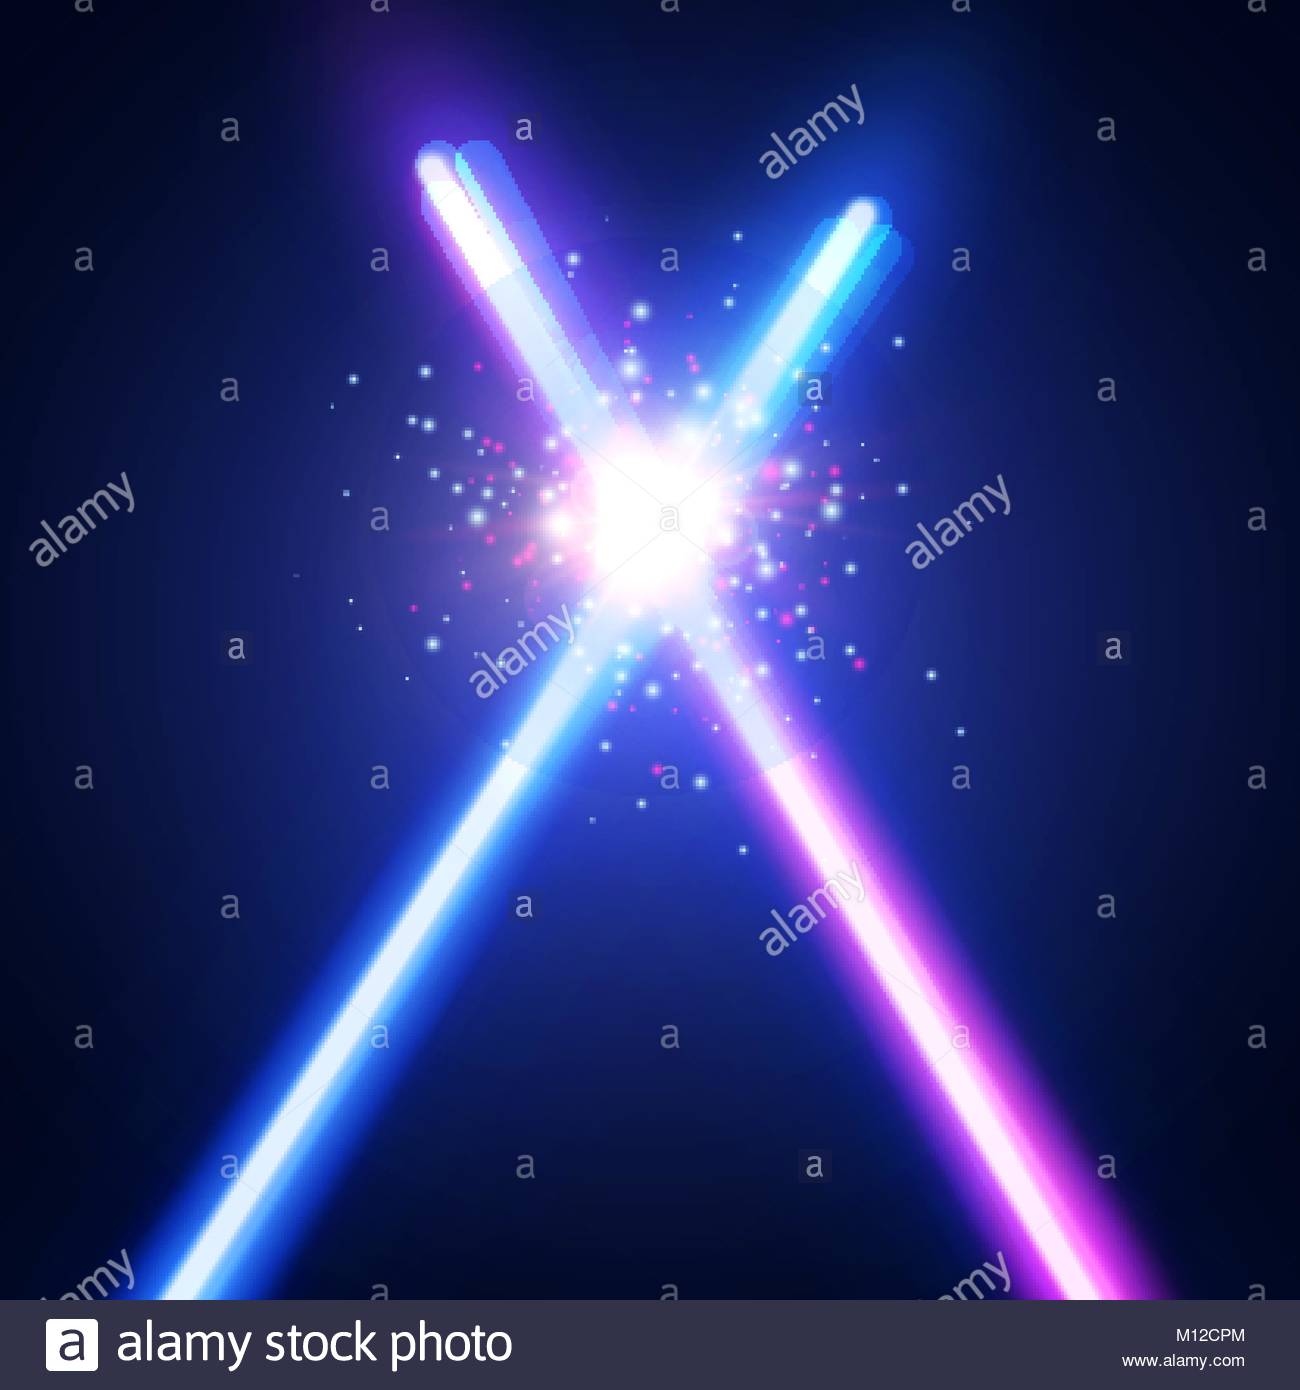 Abstract Background With Two Crossed Light Neon Swords Fight